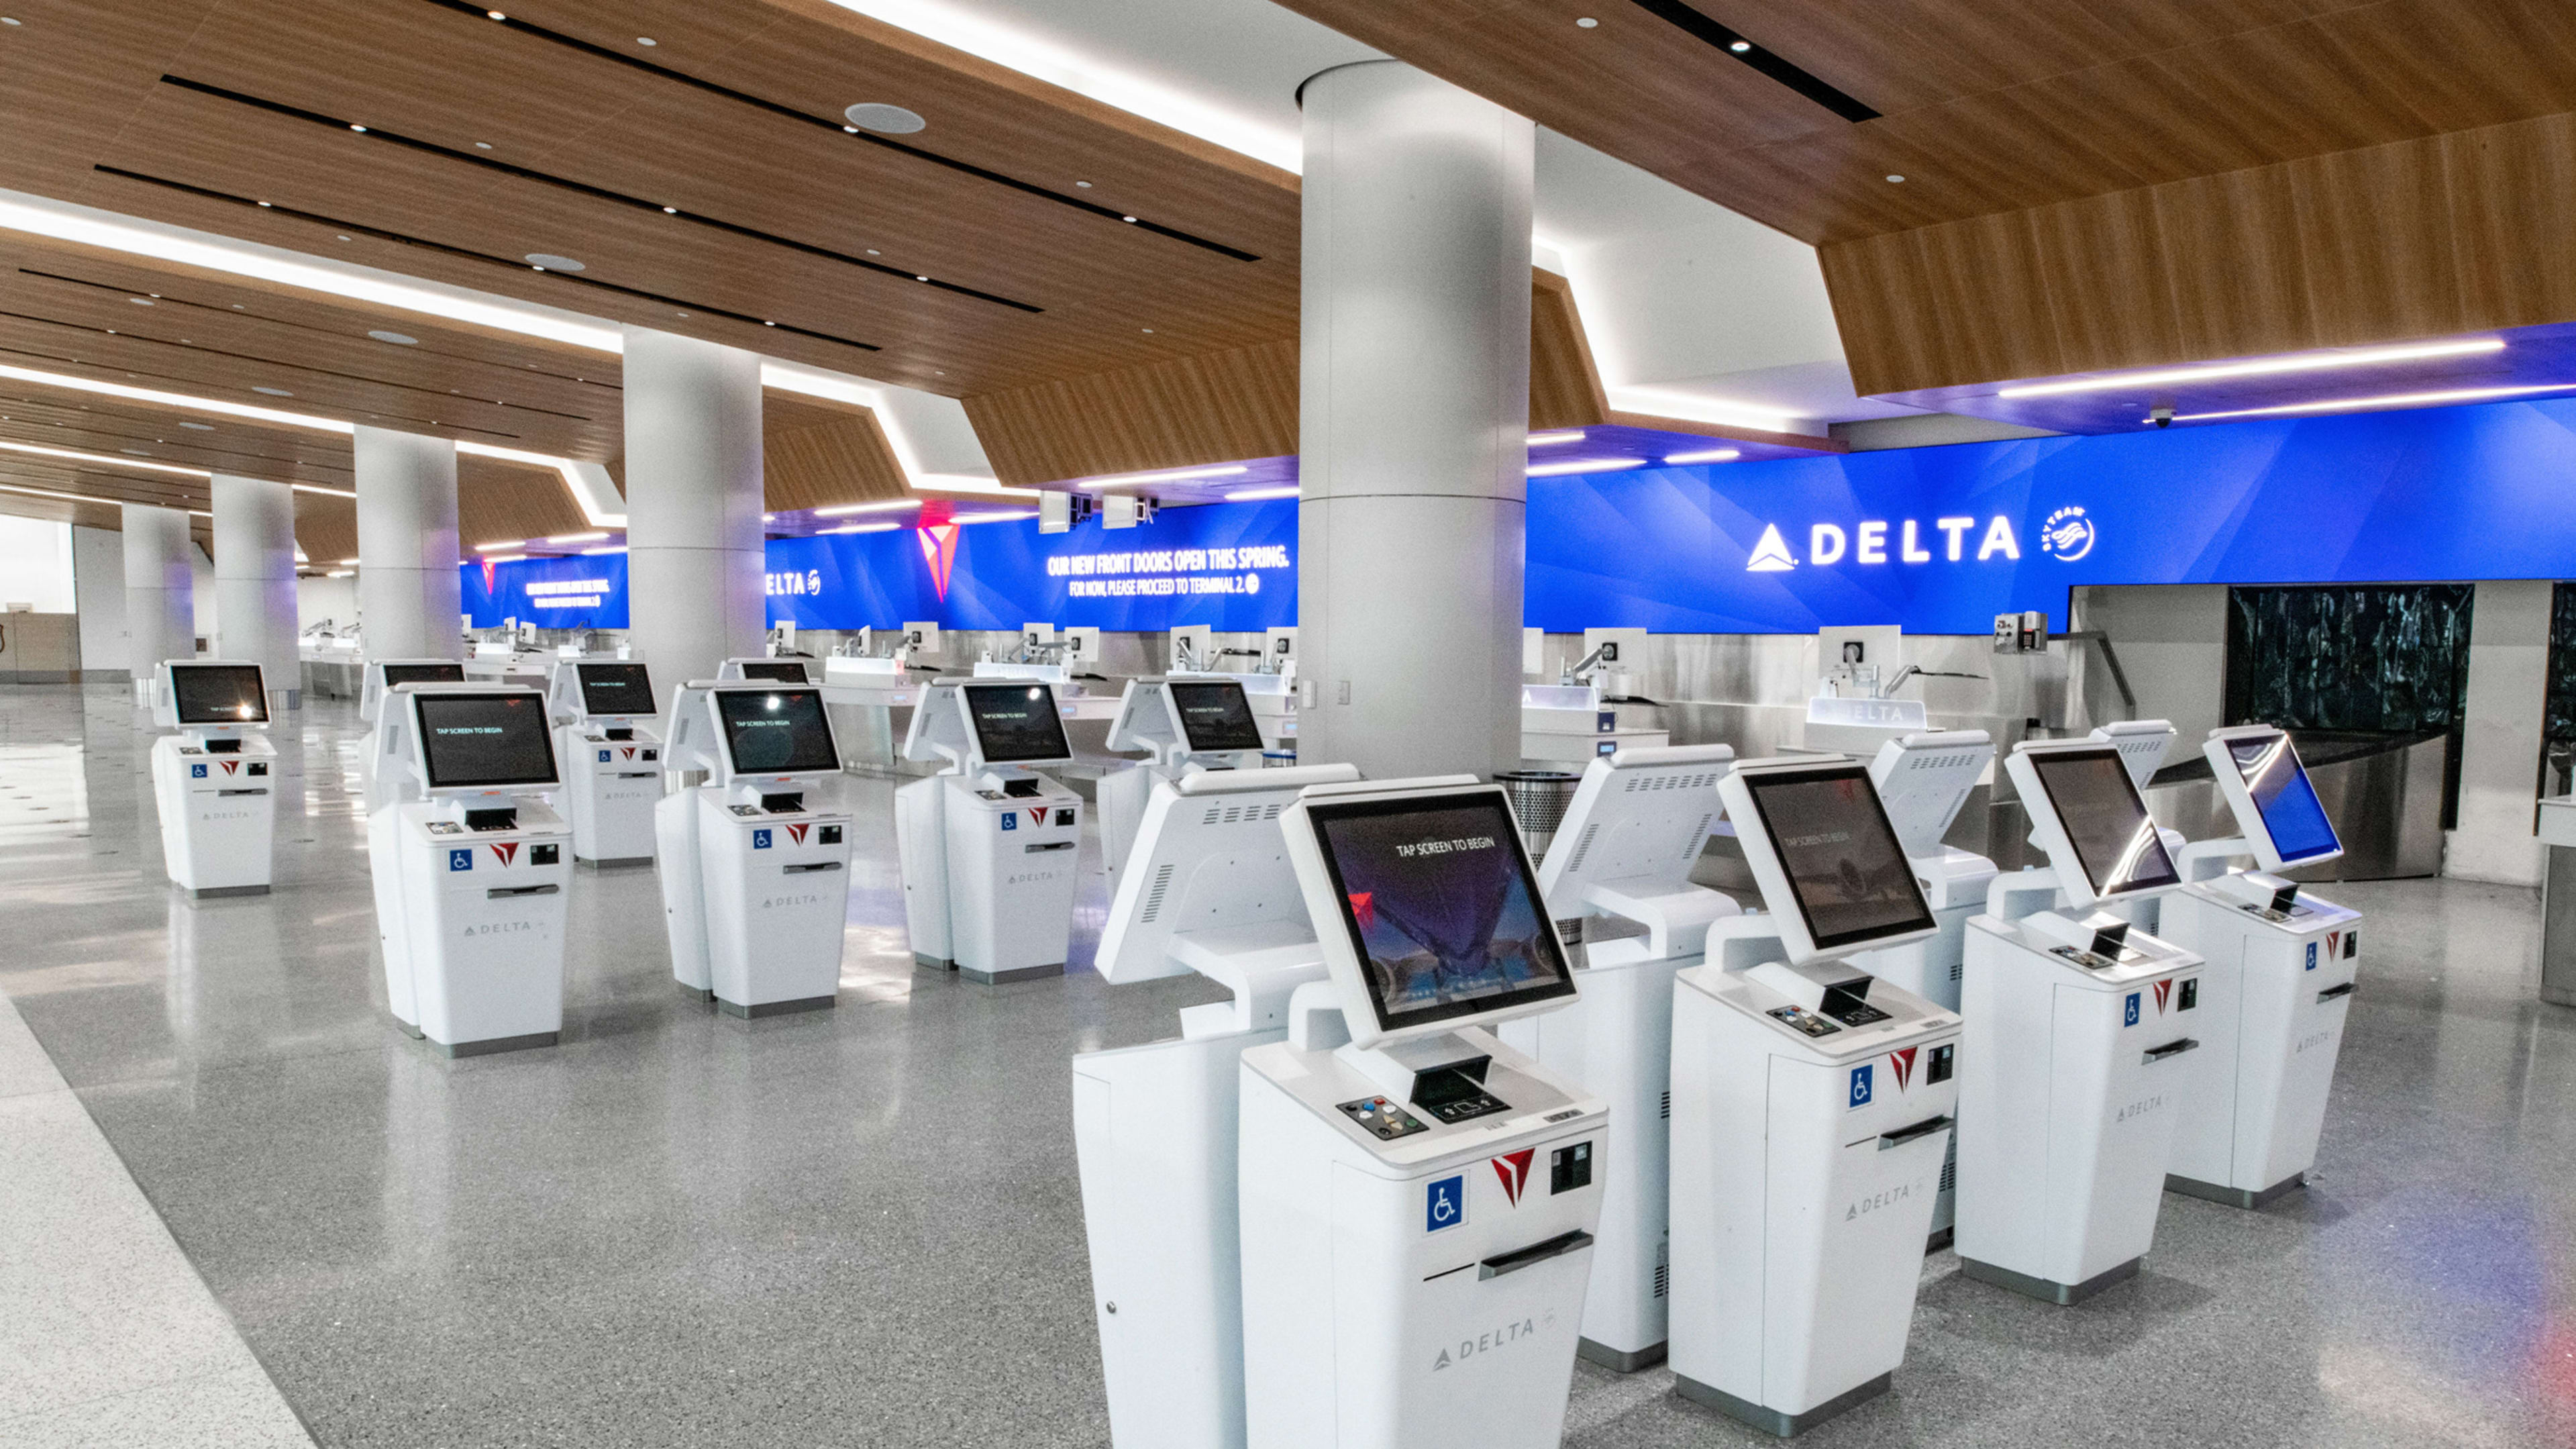 Air travel has changed dramatically. These Delta airline terminals got a $12 billion upgrade to keep up